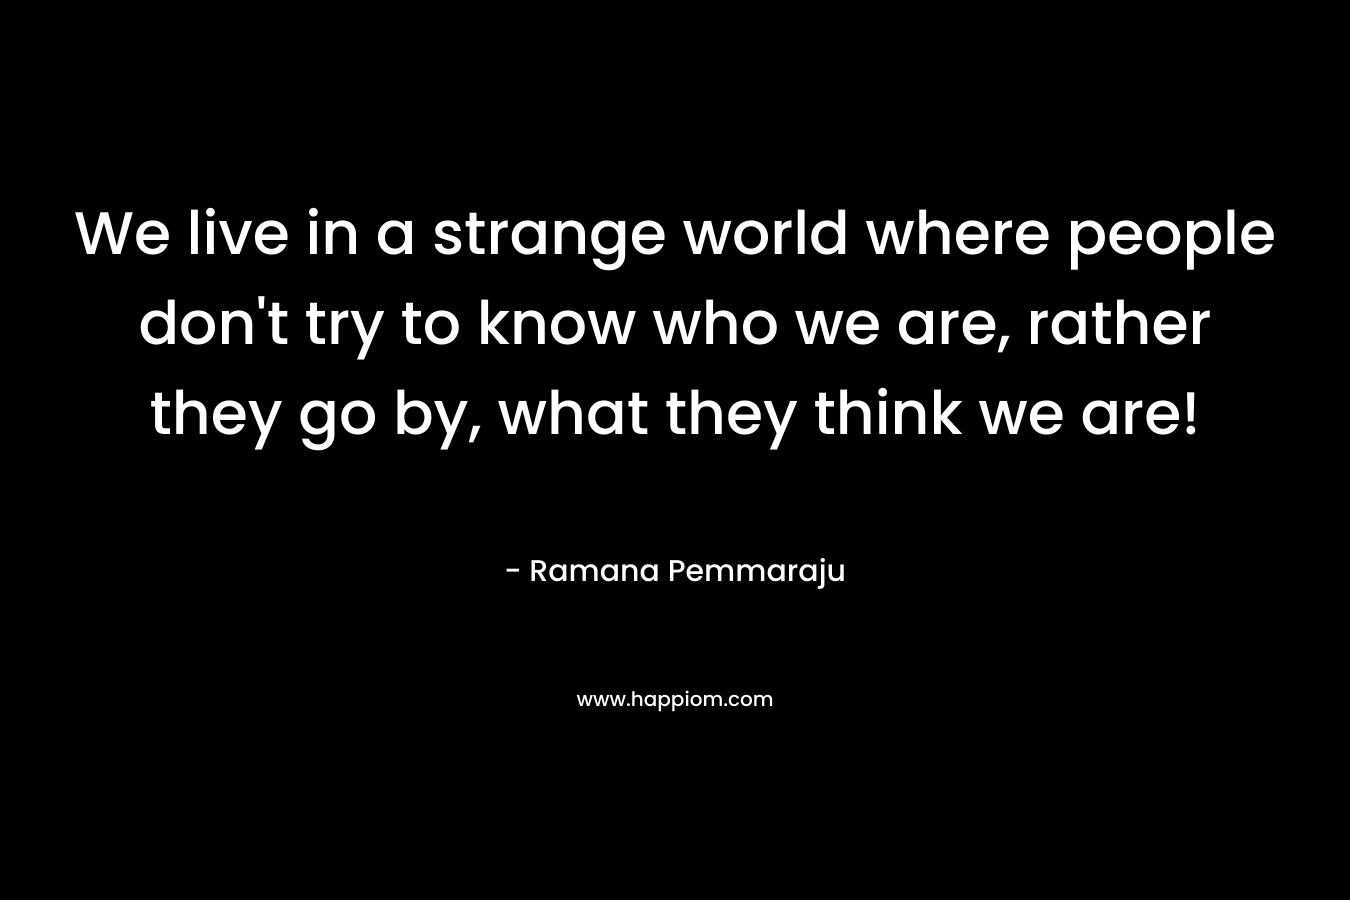 We live in a strange world where people don't try to know who we are, rather they go by, what they think we are!